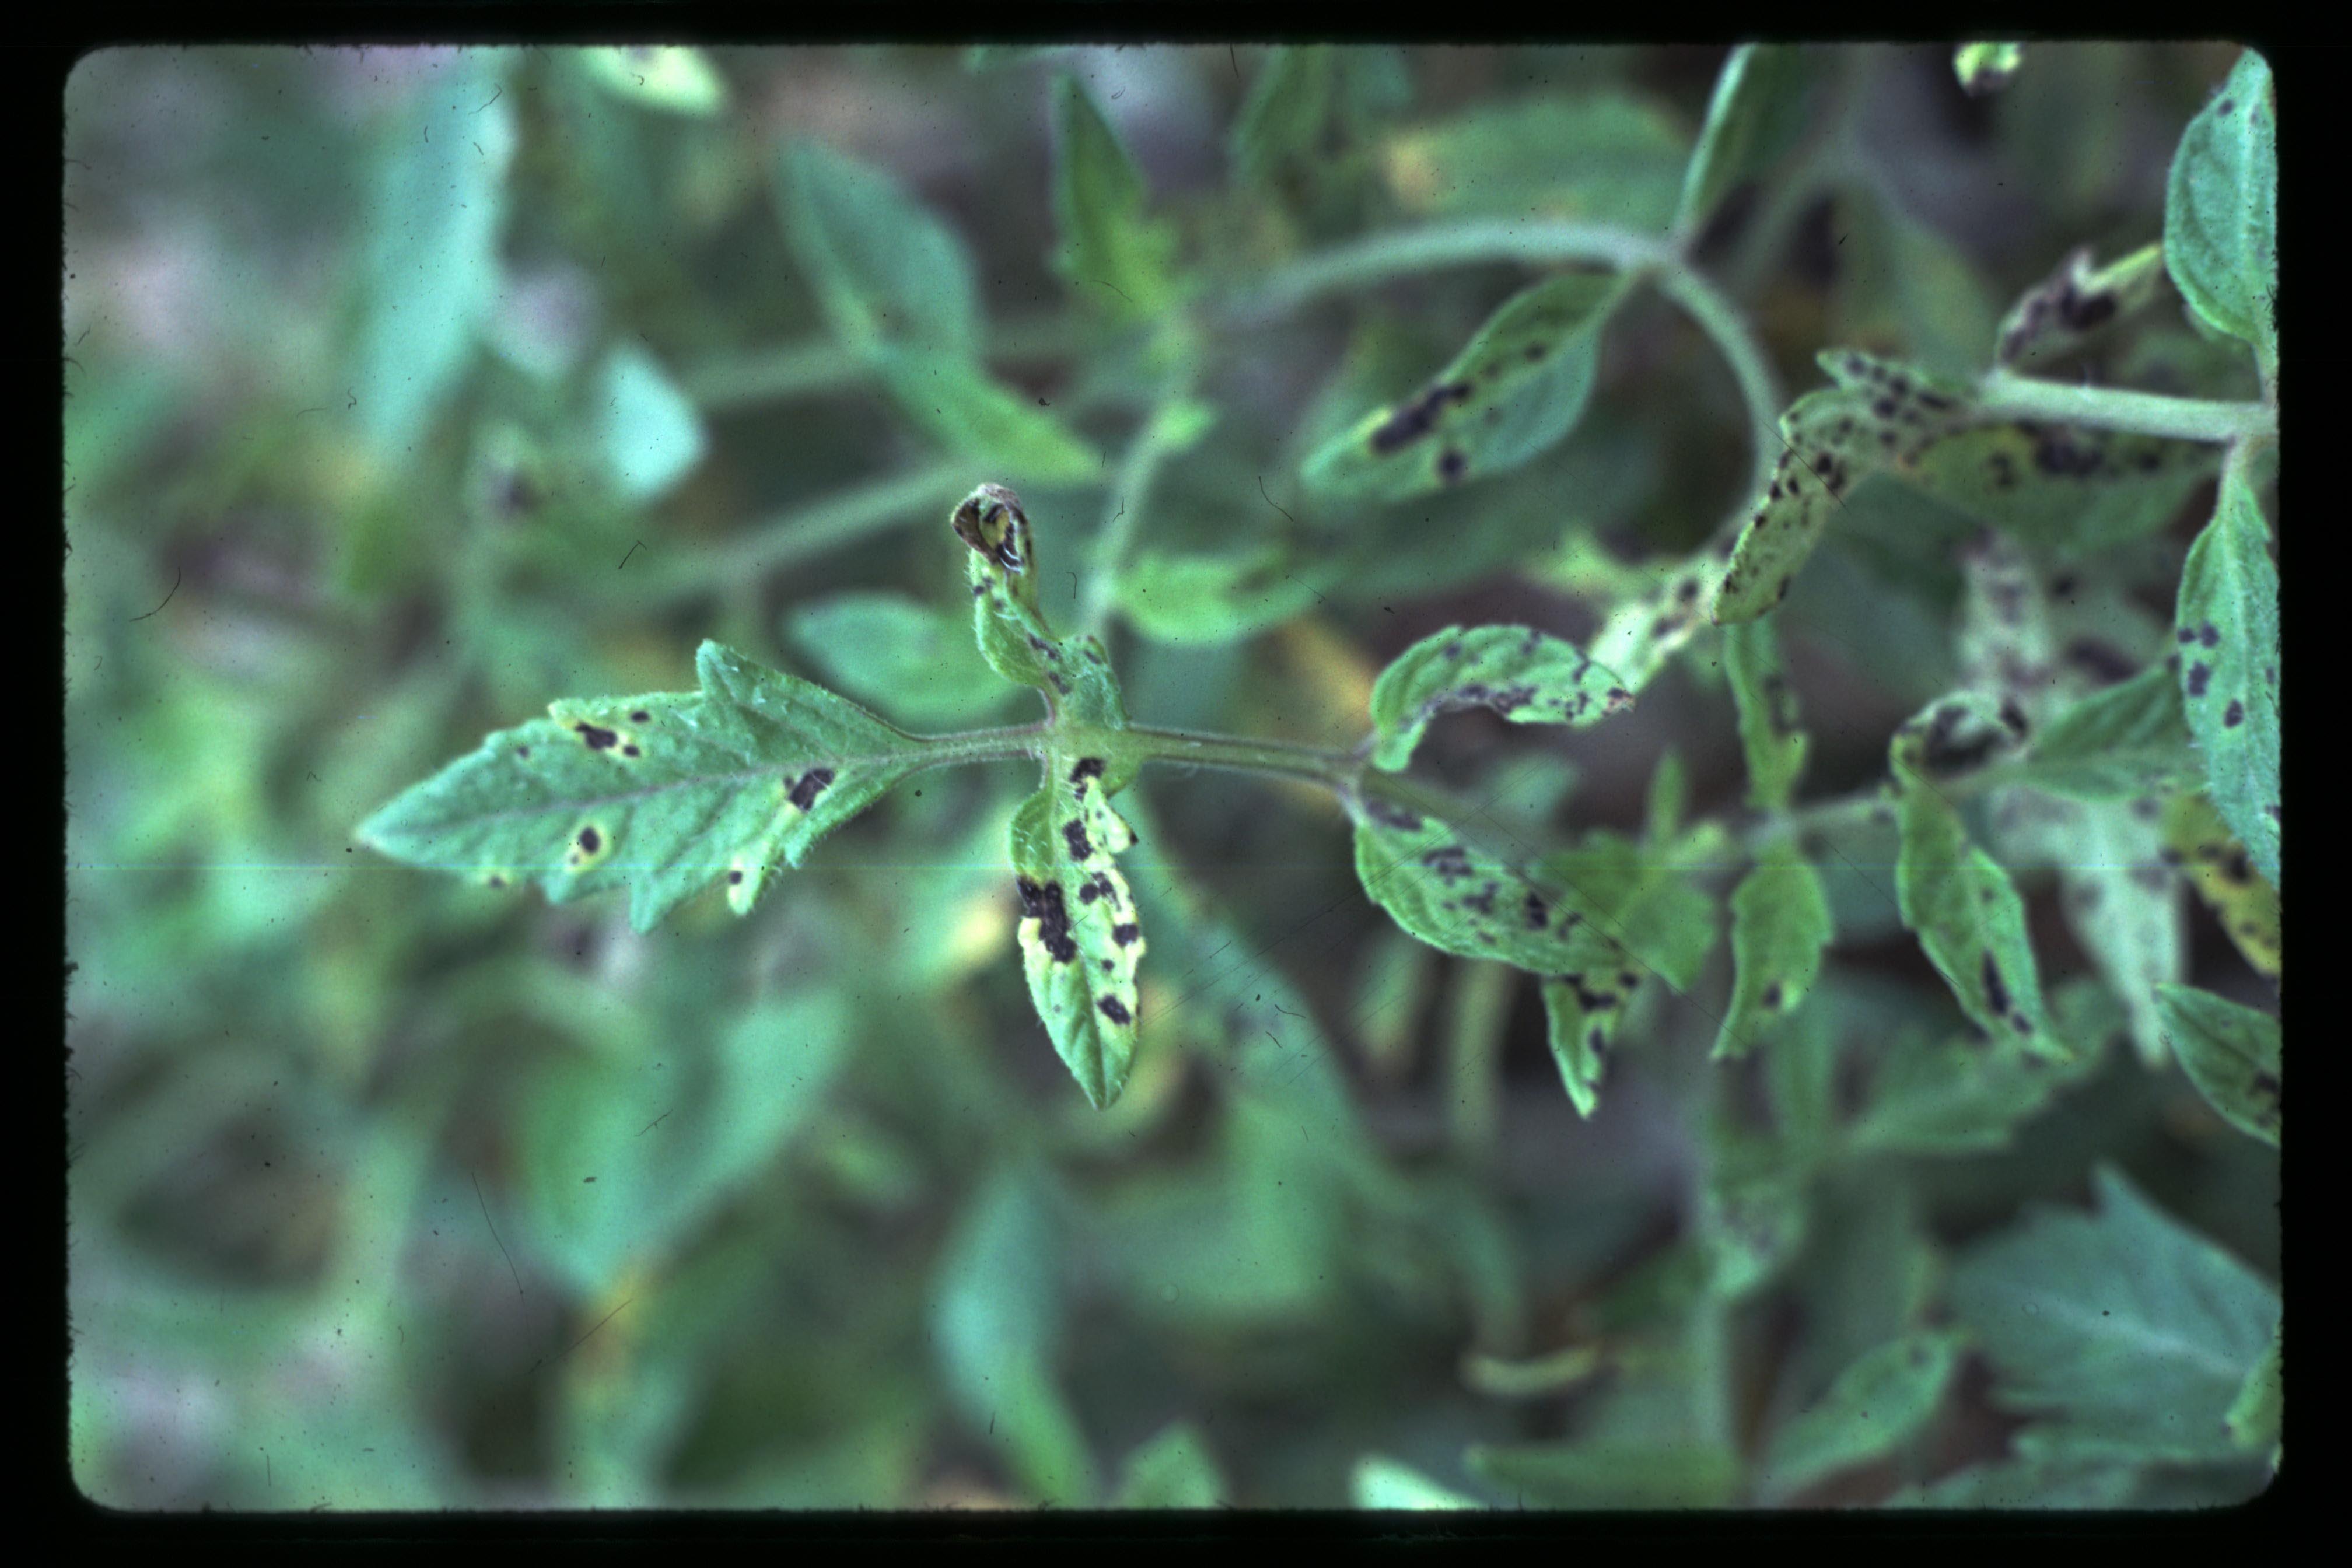 Bacterial speck lesions on tomato leaves